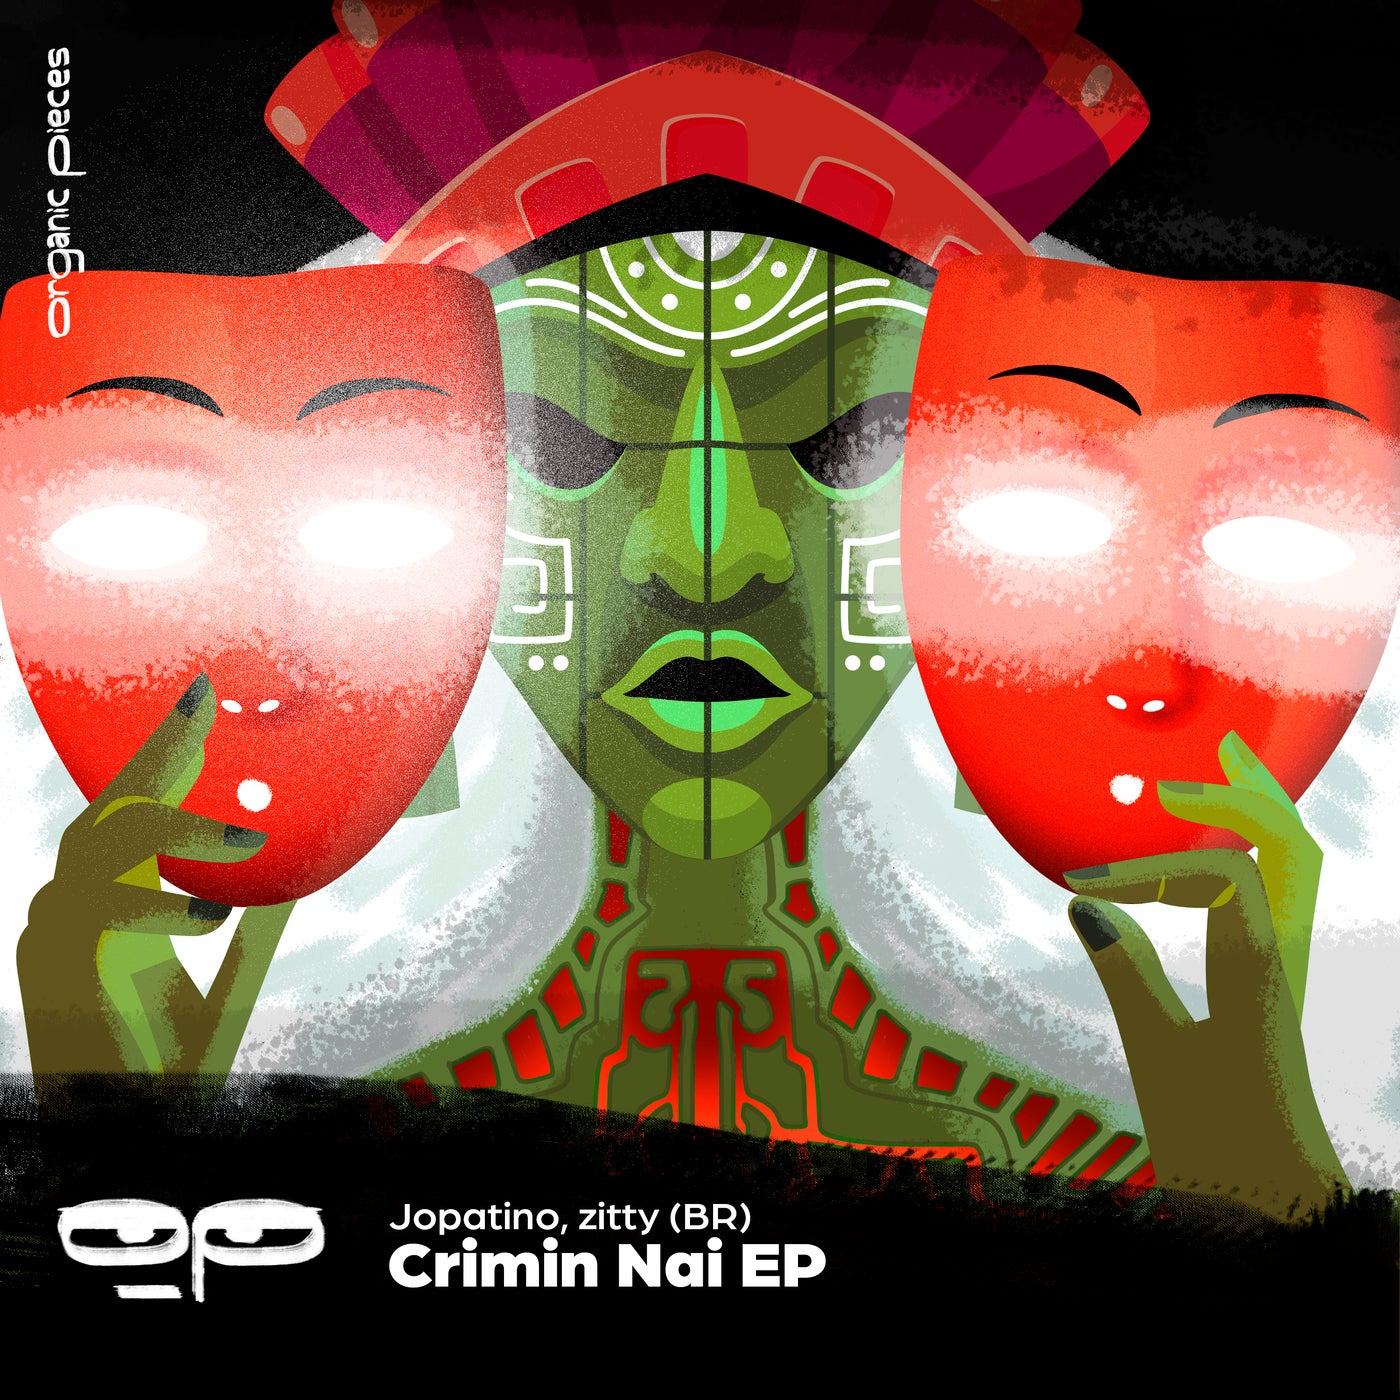 image cover: Jopatino, zitty (BR) - Crimin Nai EP on Organic Pieces